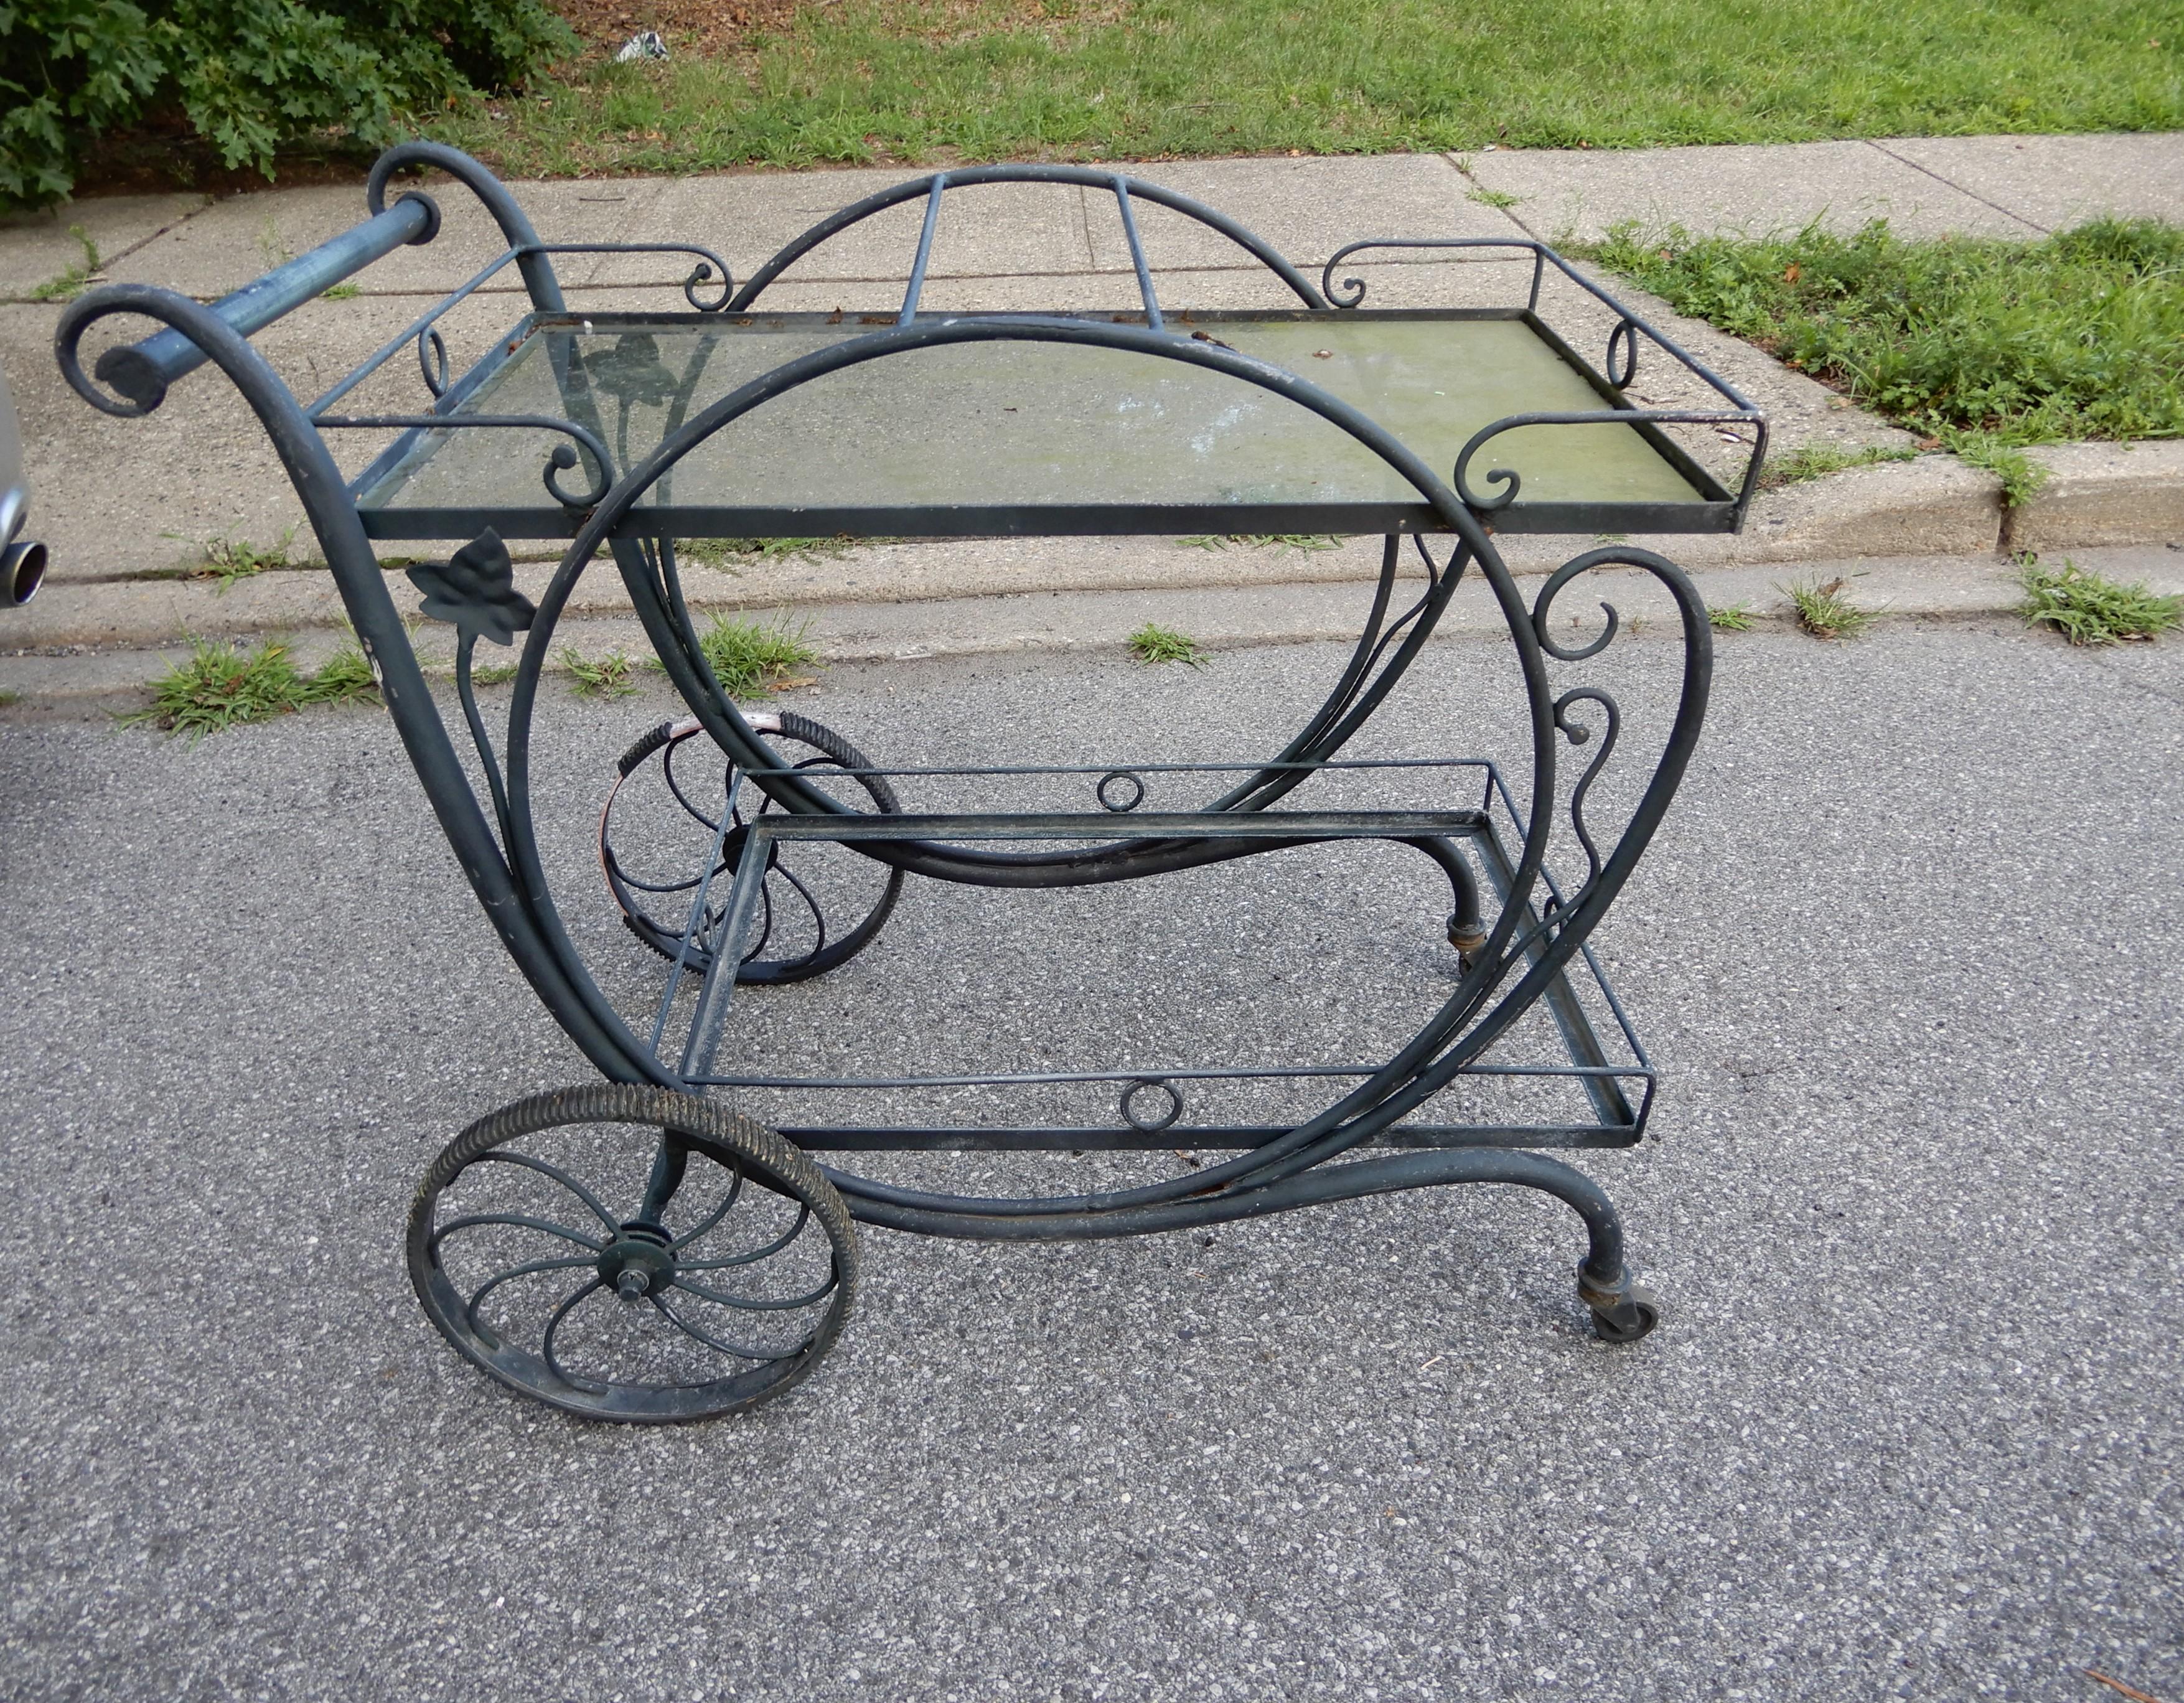 A Salterini wrought iron bar or tea cart, in the desirable Mt Vernon pattern. The tea cart needs a piece of glass for the bottom shelf. The top shelf is there and needs a cleaning. This cart is the model used in the TV series Mad Men wth John Hamm,